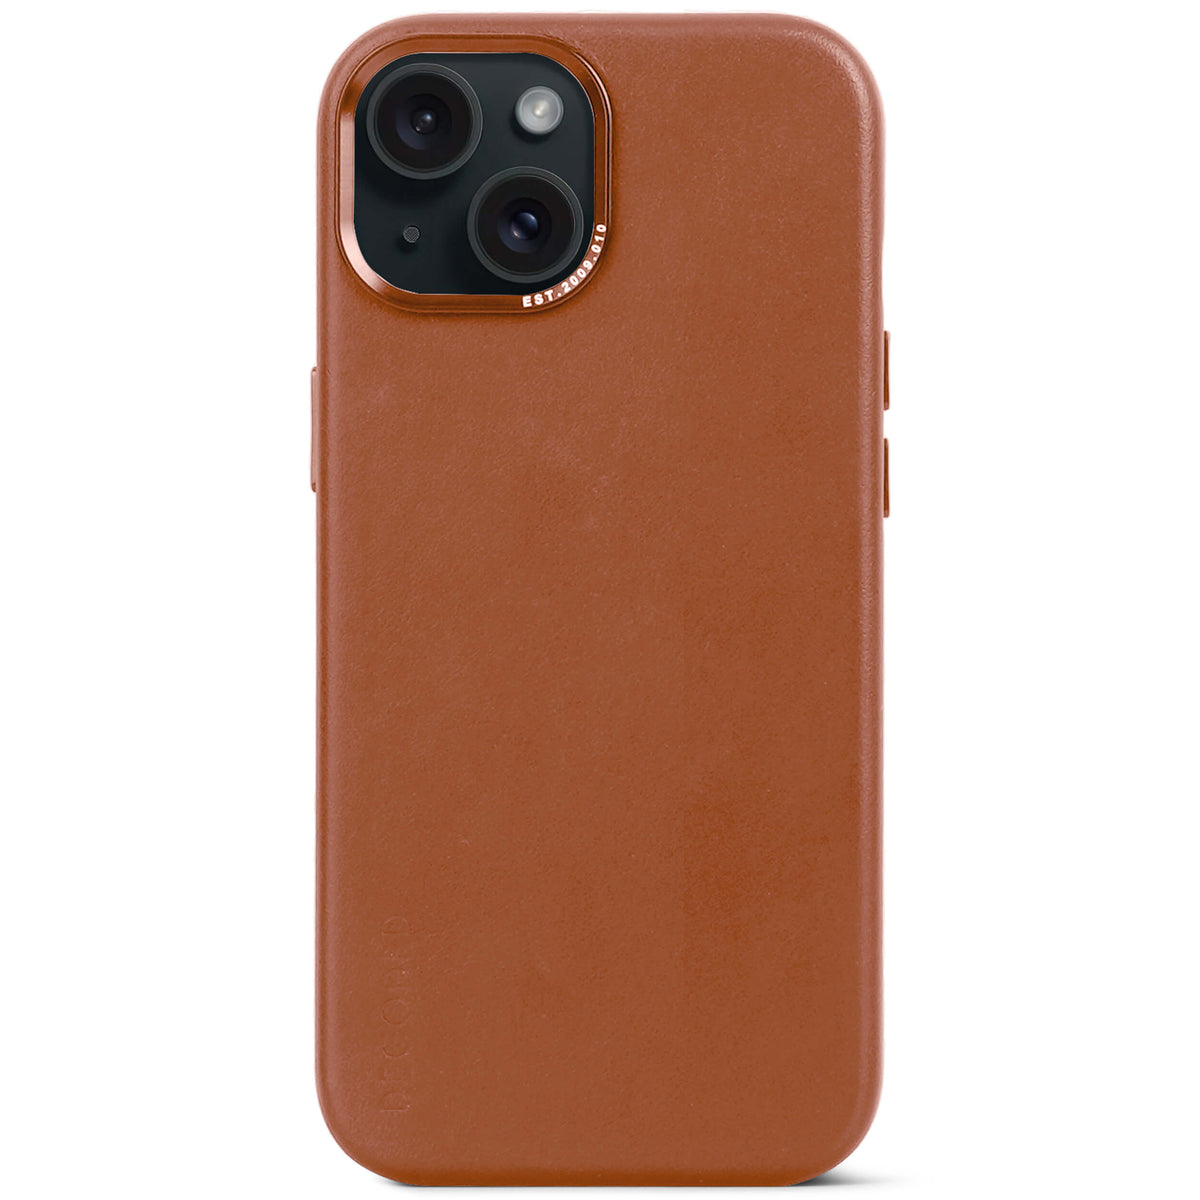 Apple's leather case for iPhone 12 gets an upgrade